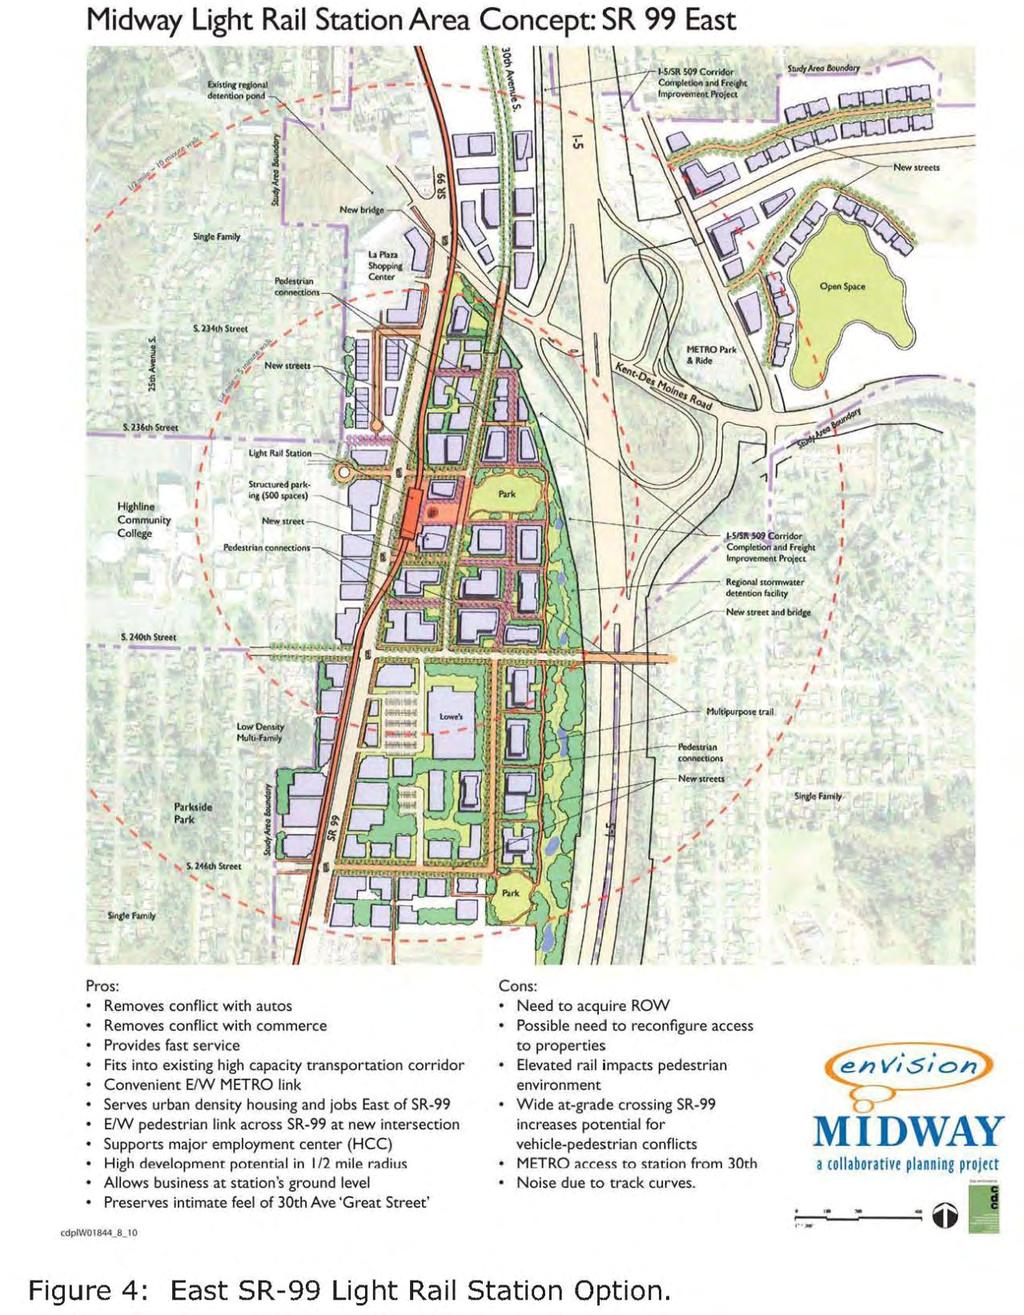 Review of Plans Pertinent to the Federal Way Transit Extension Source: City of Kent and City of Des Moines, 2011.